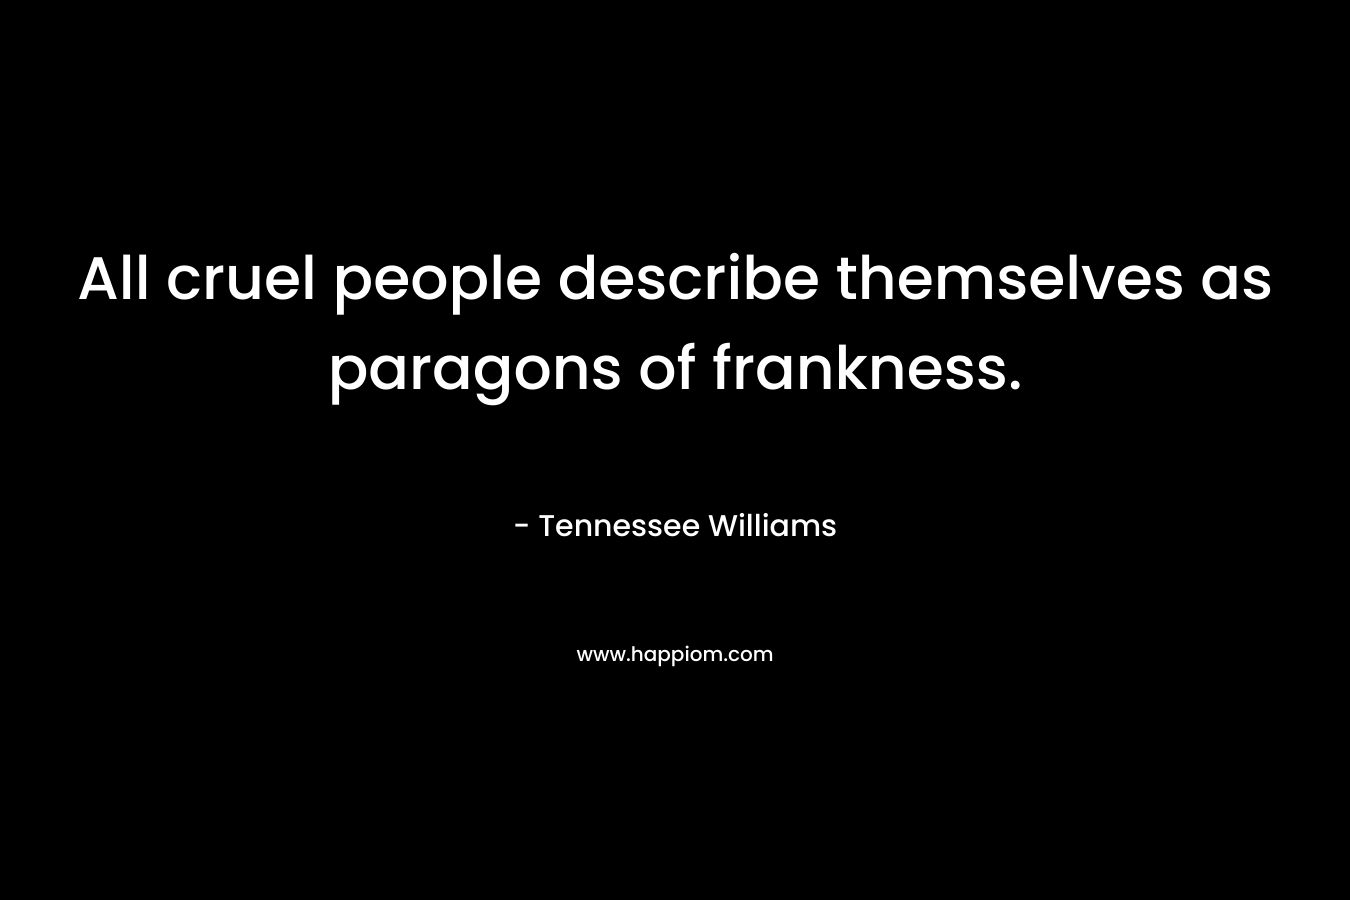 All cruel people describe themselves as paragons of frankness. – Tennessee Williams